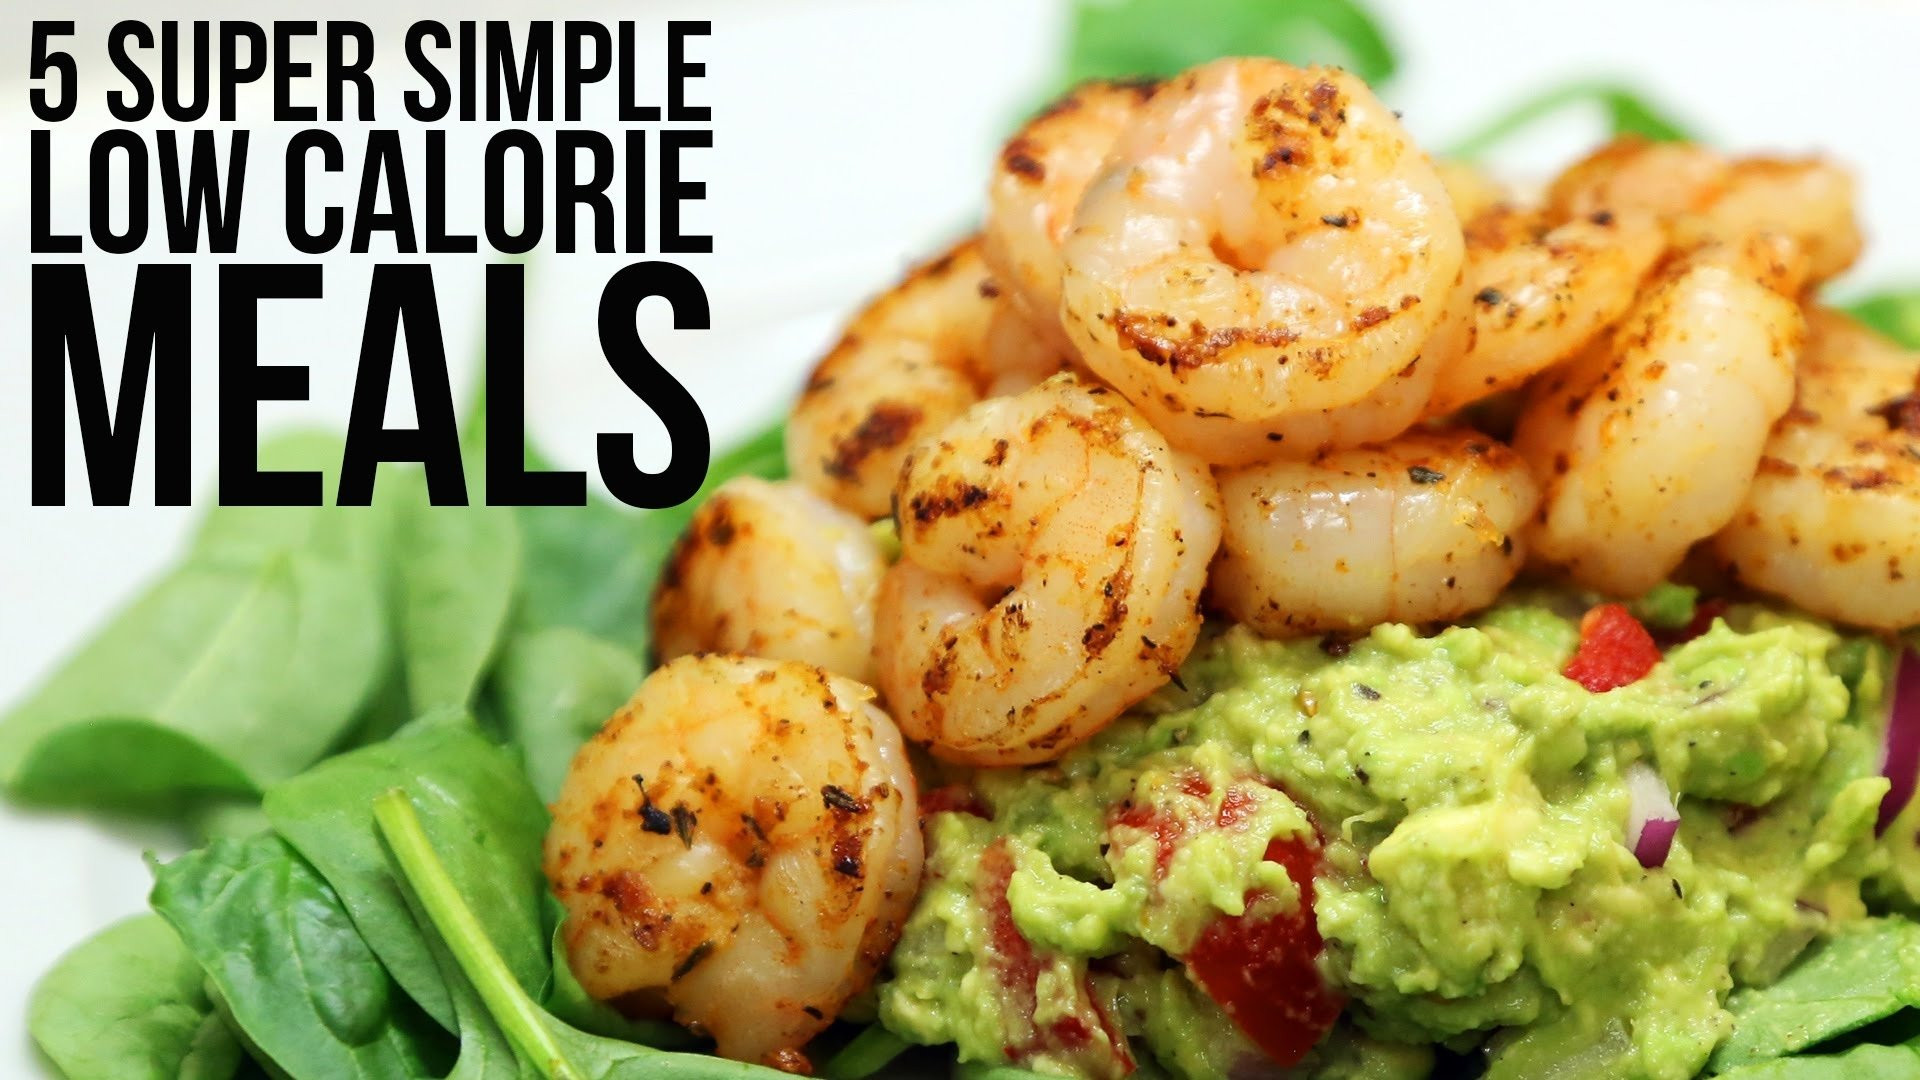 15 Healthy Low Calorie Lunch Recipes